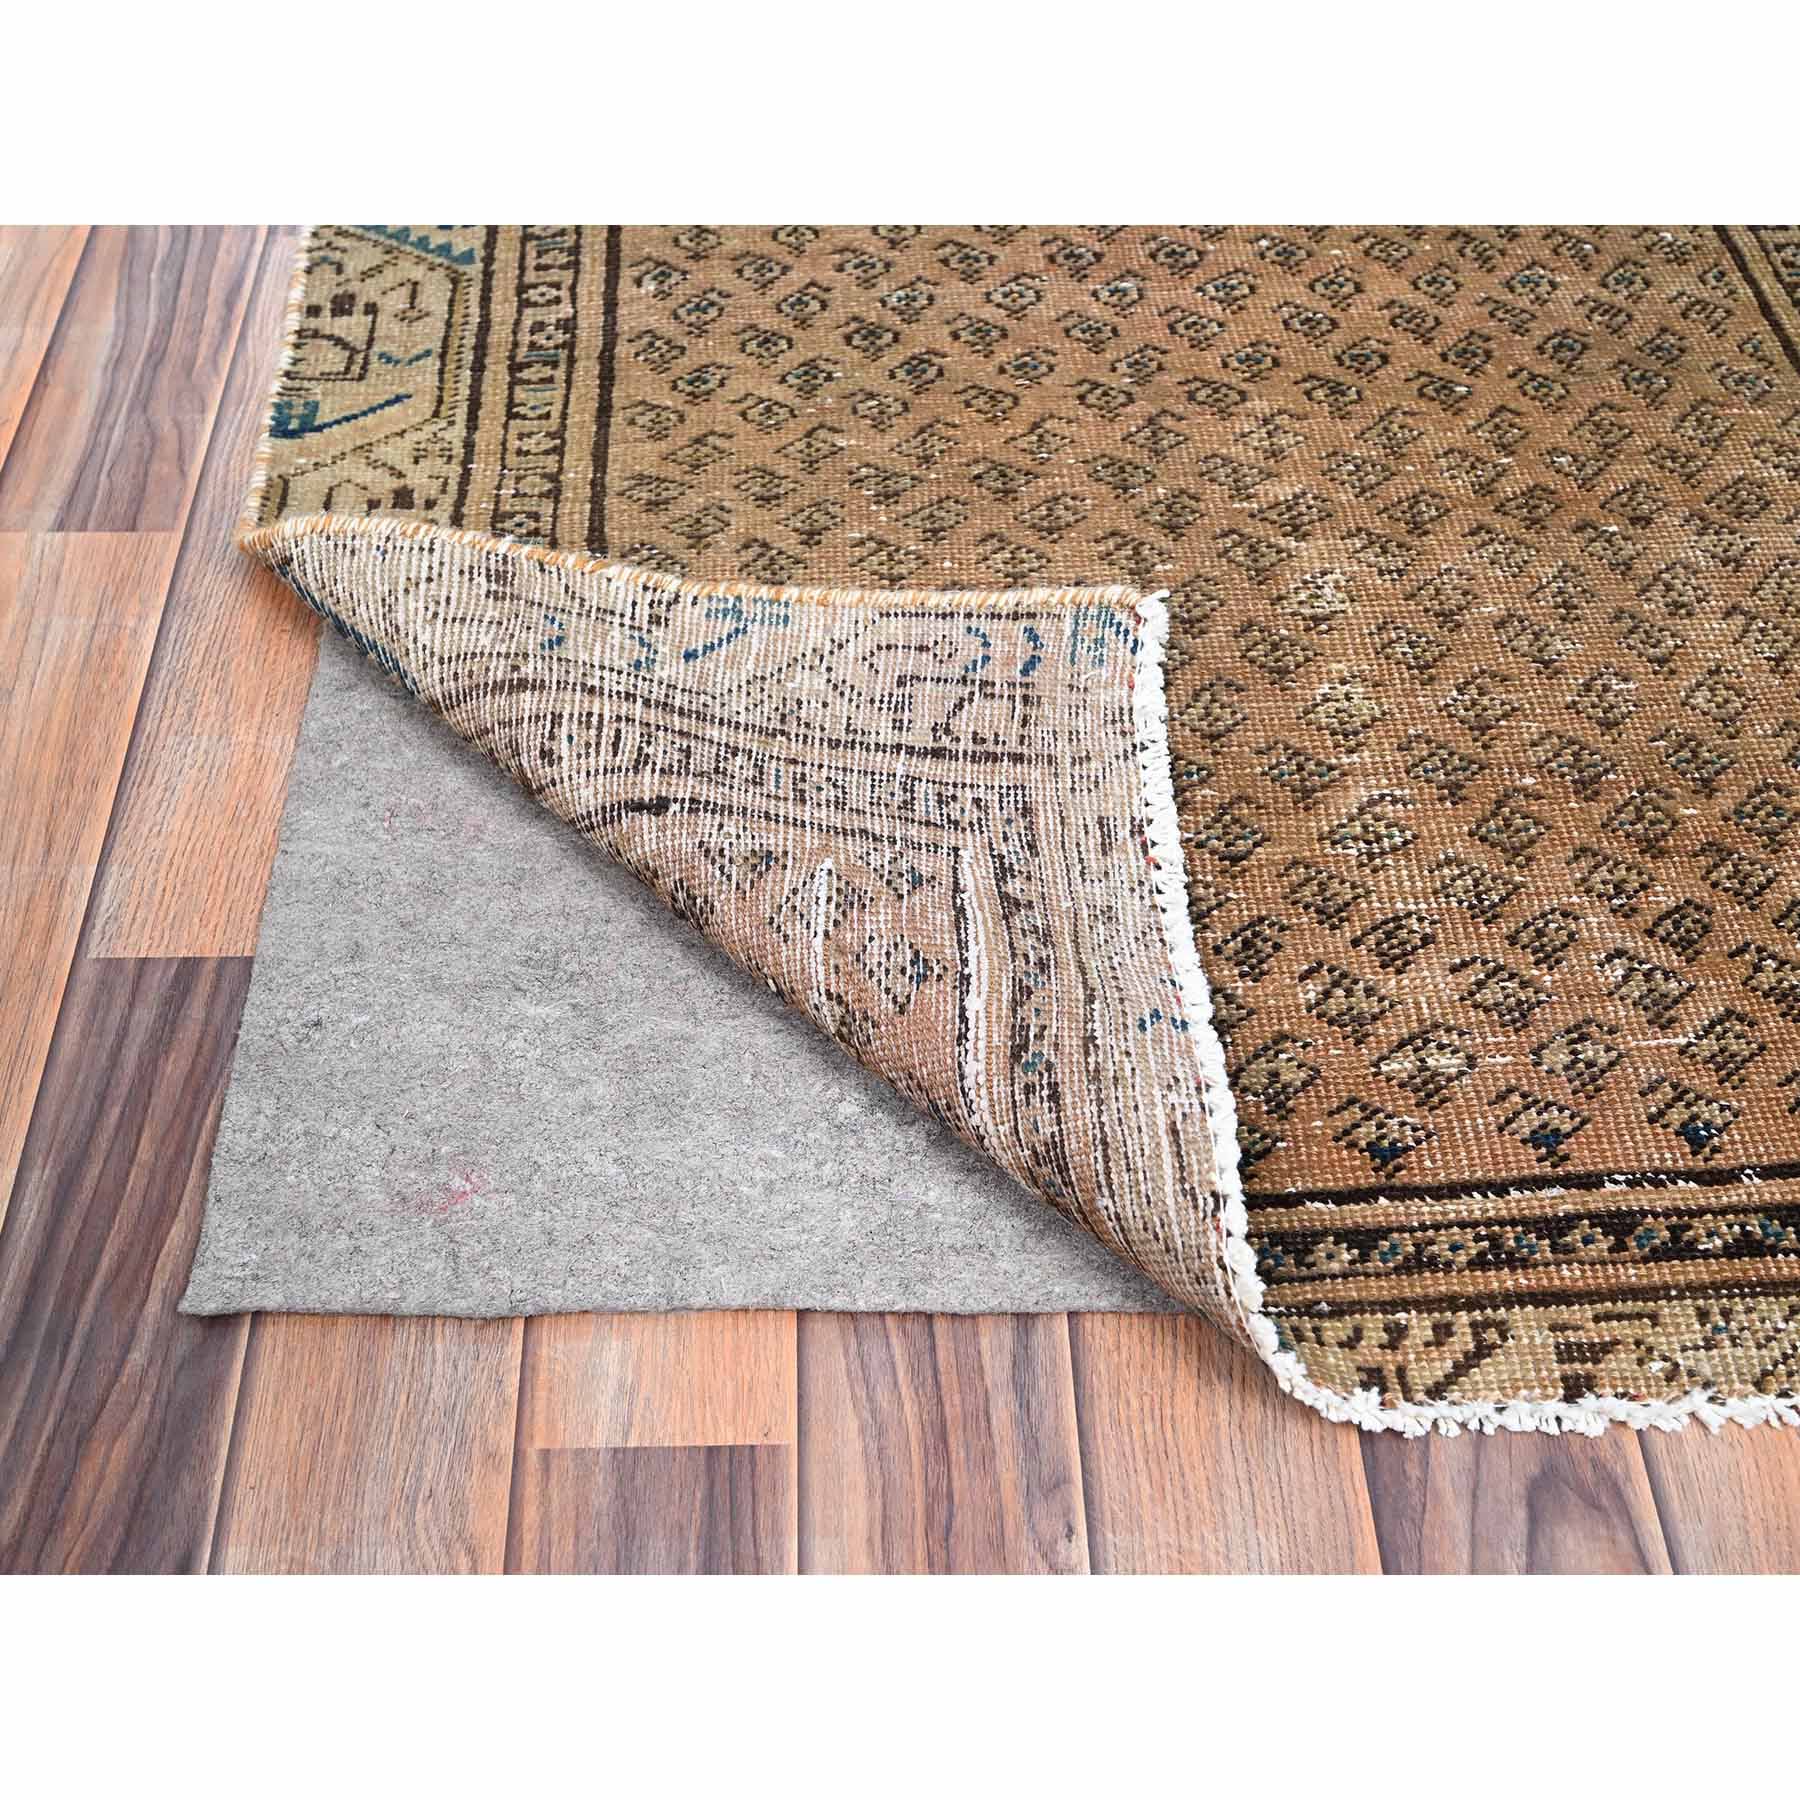 Overdyed-Vintage-Hand-Knotted-Rug-430130